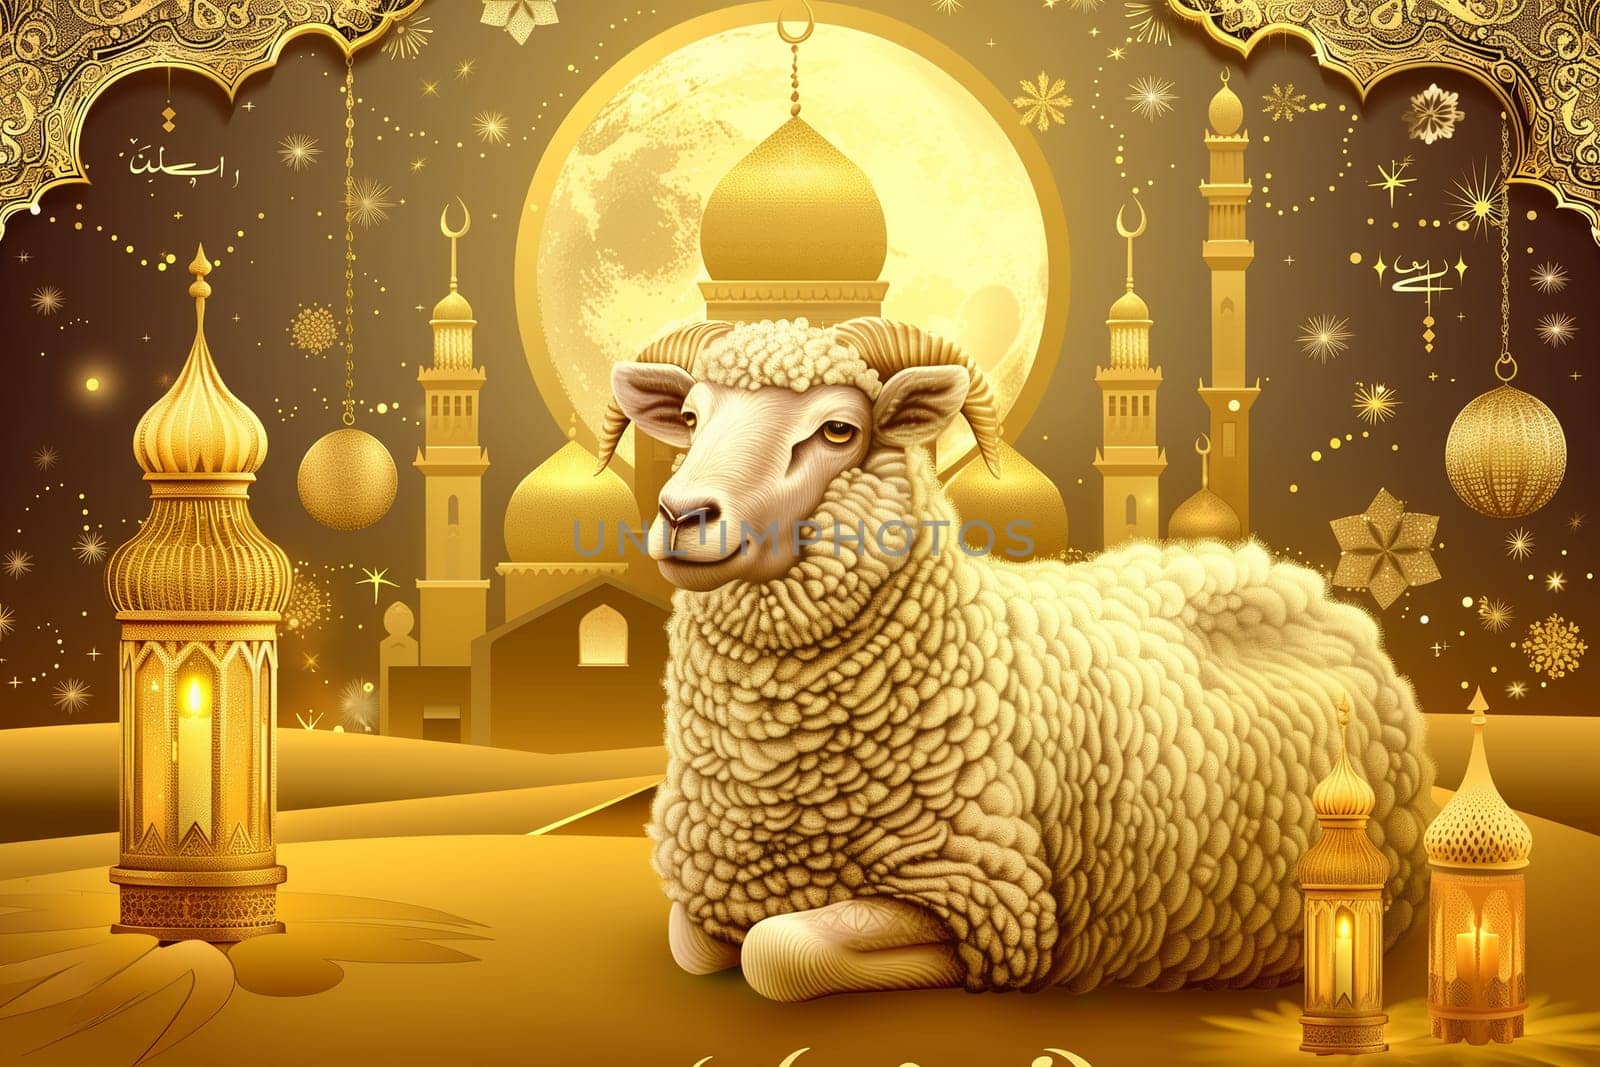 Celebrating Kurban Bayram With a Festive Sheep Illustration Surrounded by Lanterns and Mosques by Sd28DimoN_1976